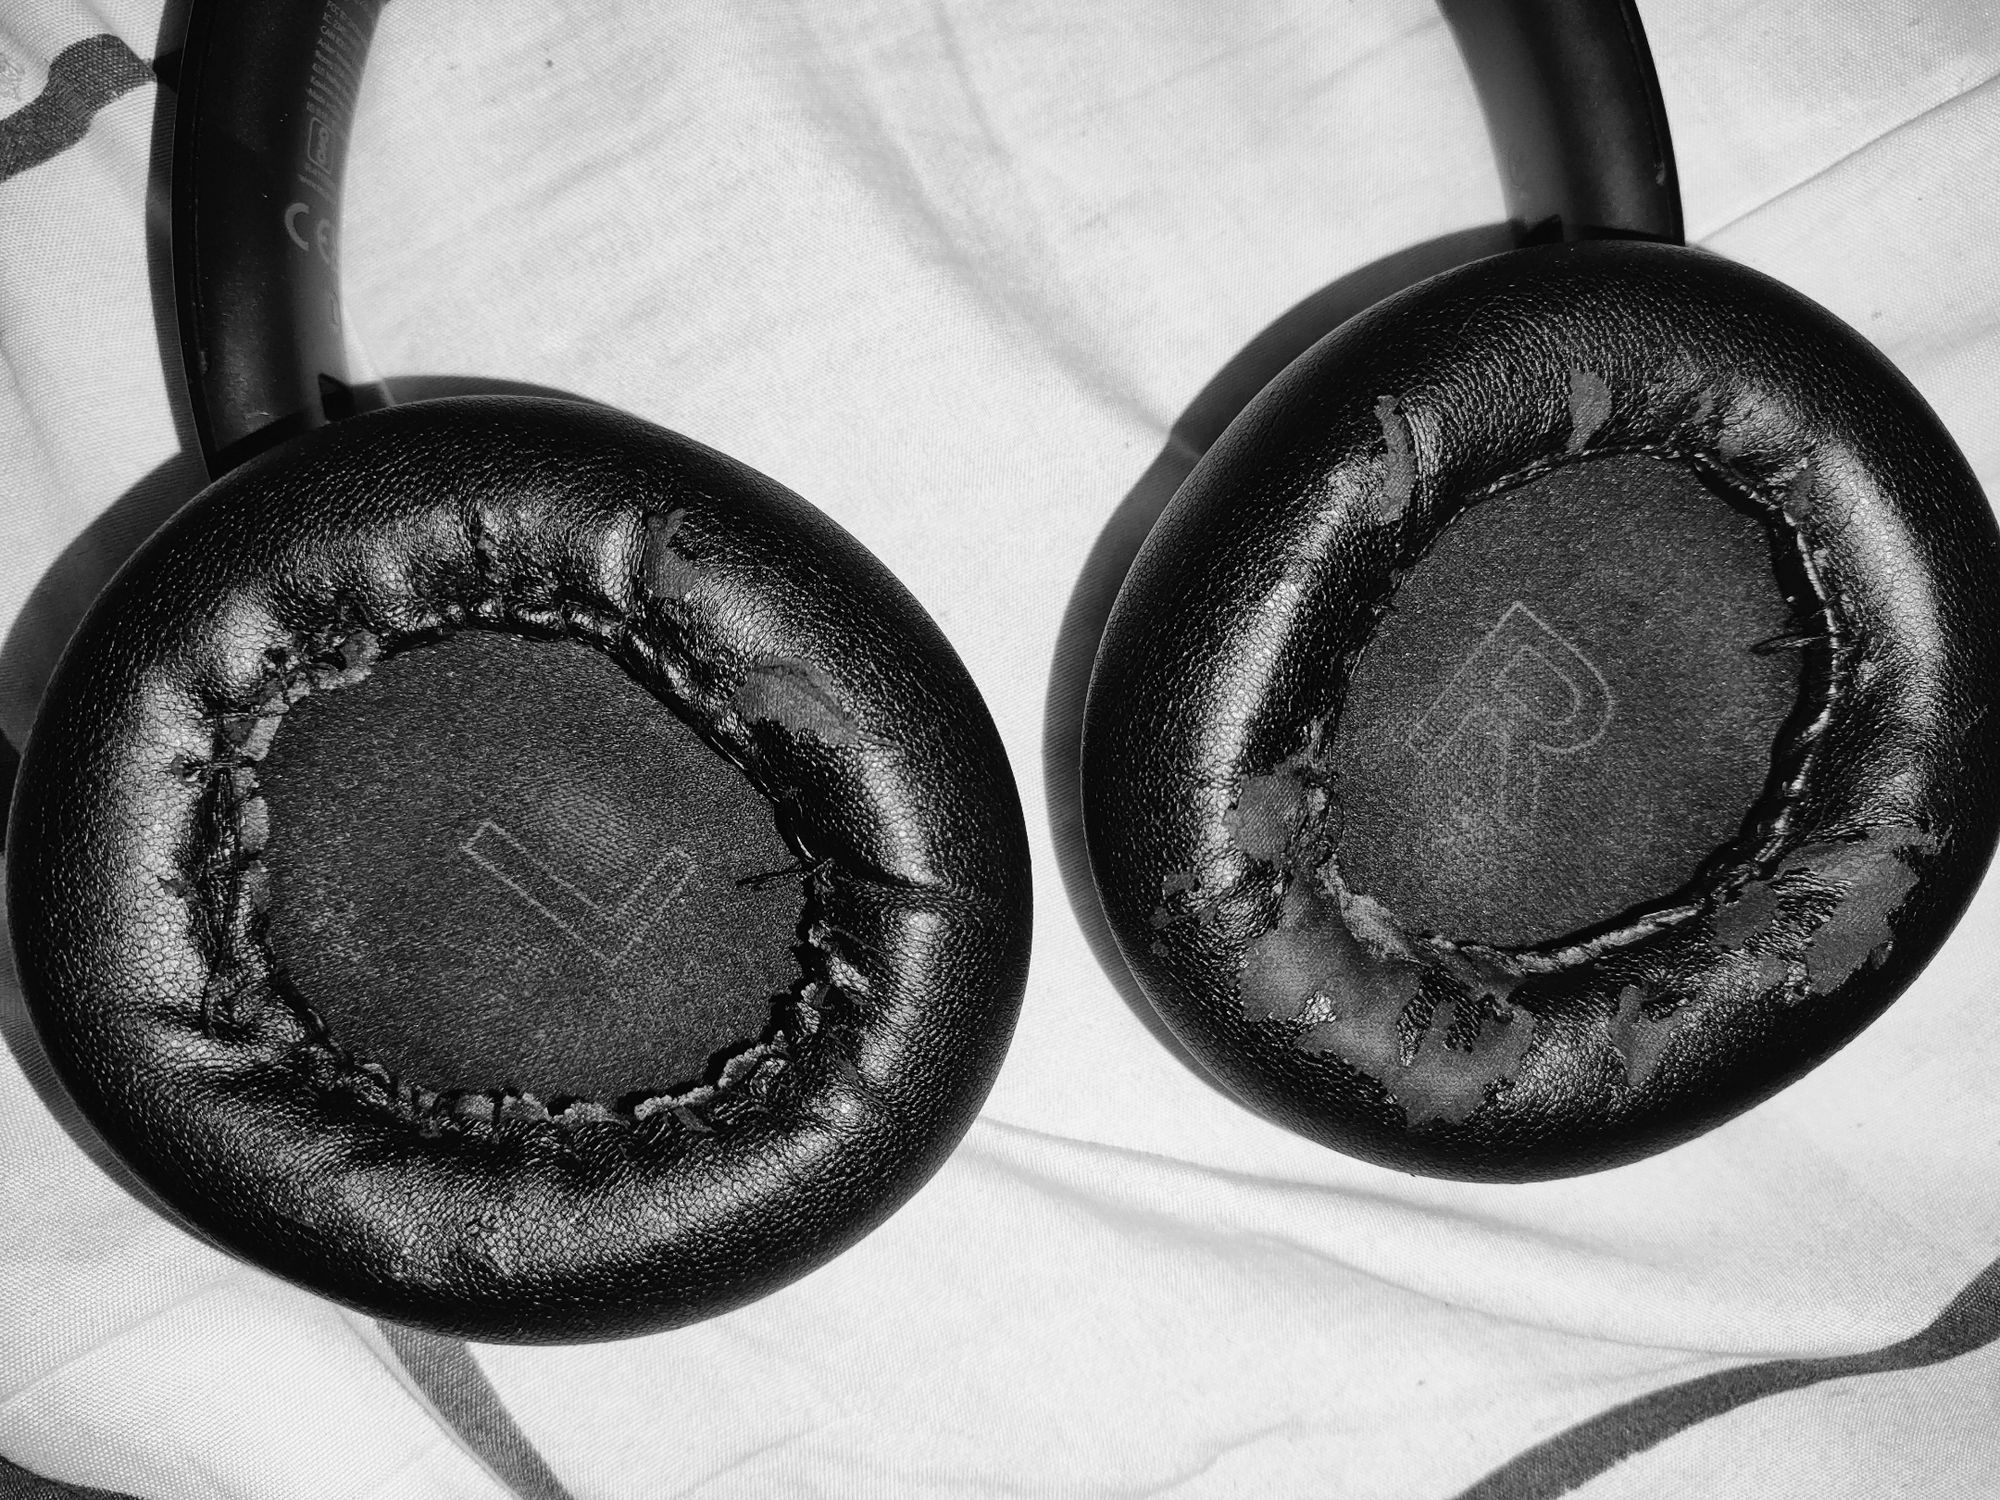 HOW TO FIX/REPAIR HEADPHONE SPONGES - WITHOUT BUYING NEW PADS